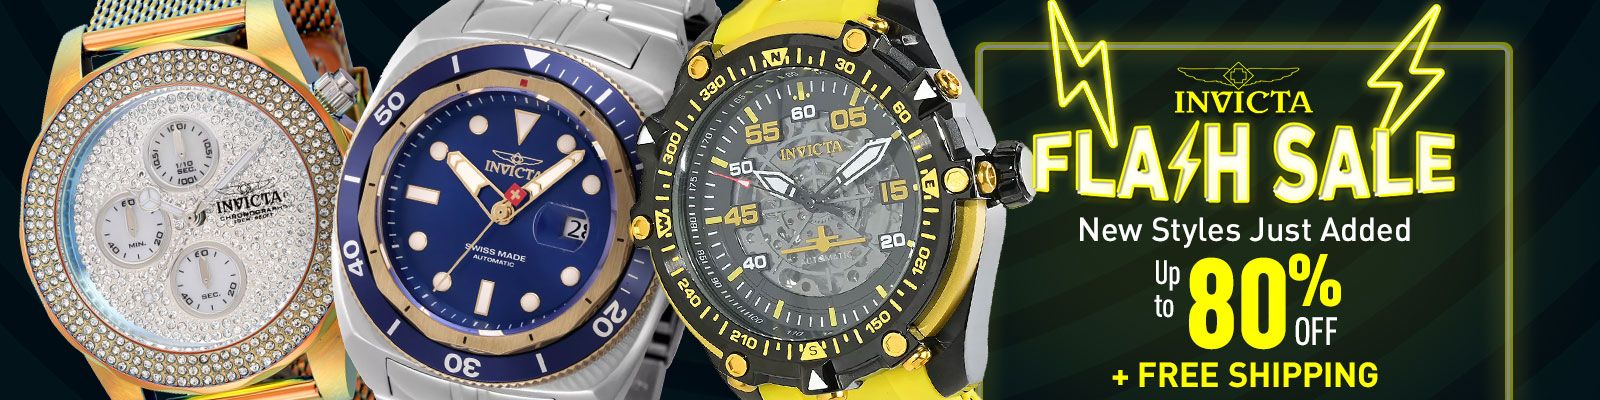 Invicta Flash Sale  New Styles Just Added Up to 80% Off + FREE SHIPPING | 918-116, 922-390, 926-276